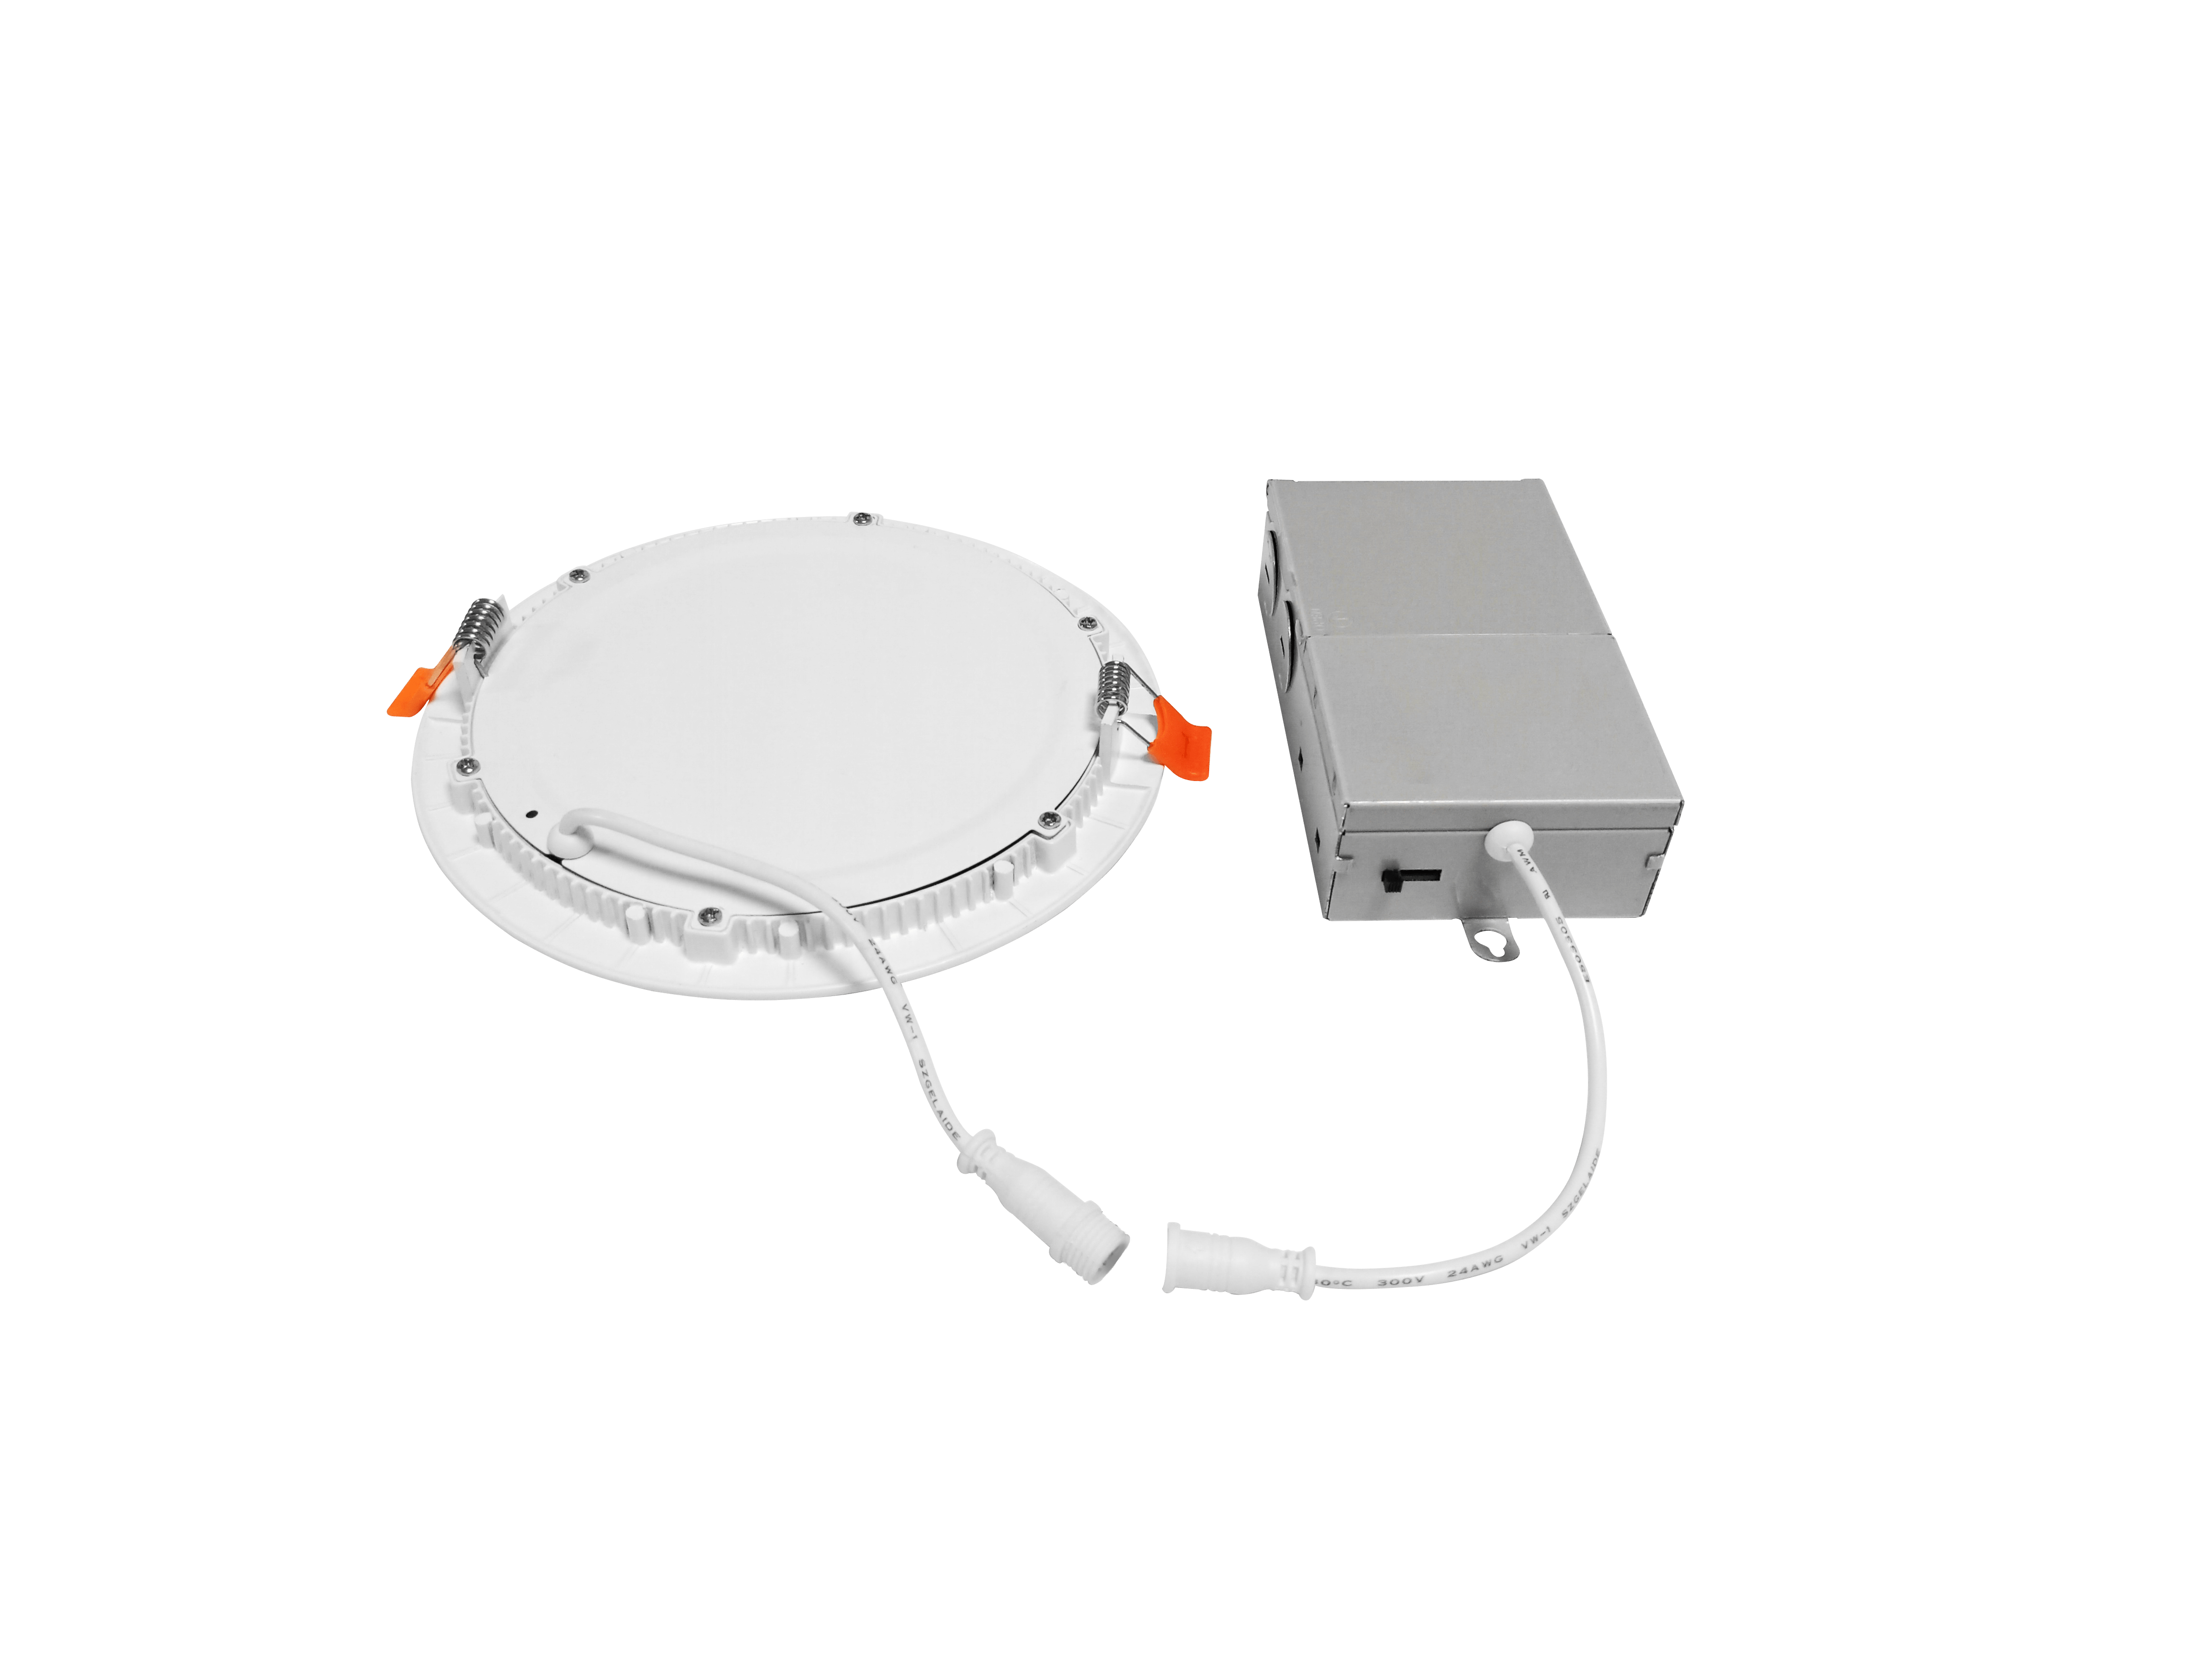 Energy-Efficient and Versatile: 4-Inch and 6-Inch LED Slim Panel Lights with 5CCT Selectable, Dimmable, and ETL Listed" - Eco LED Lightings 